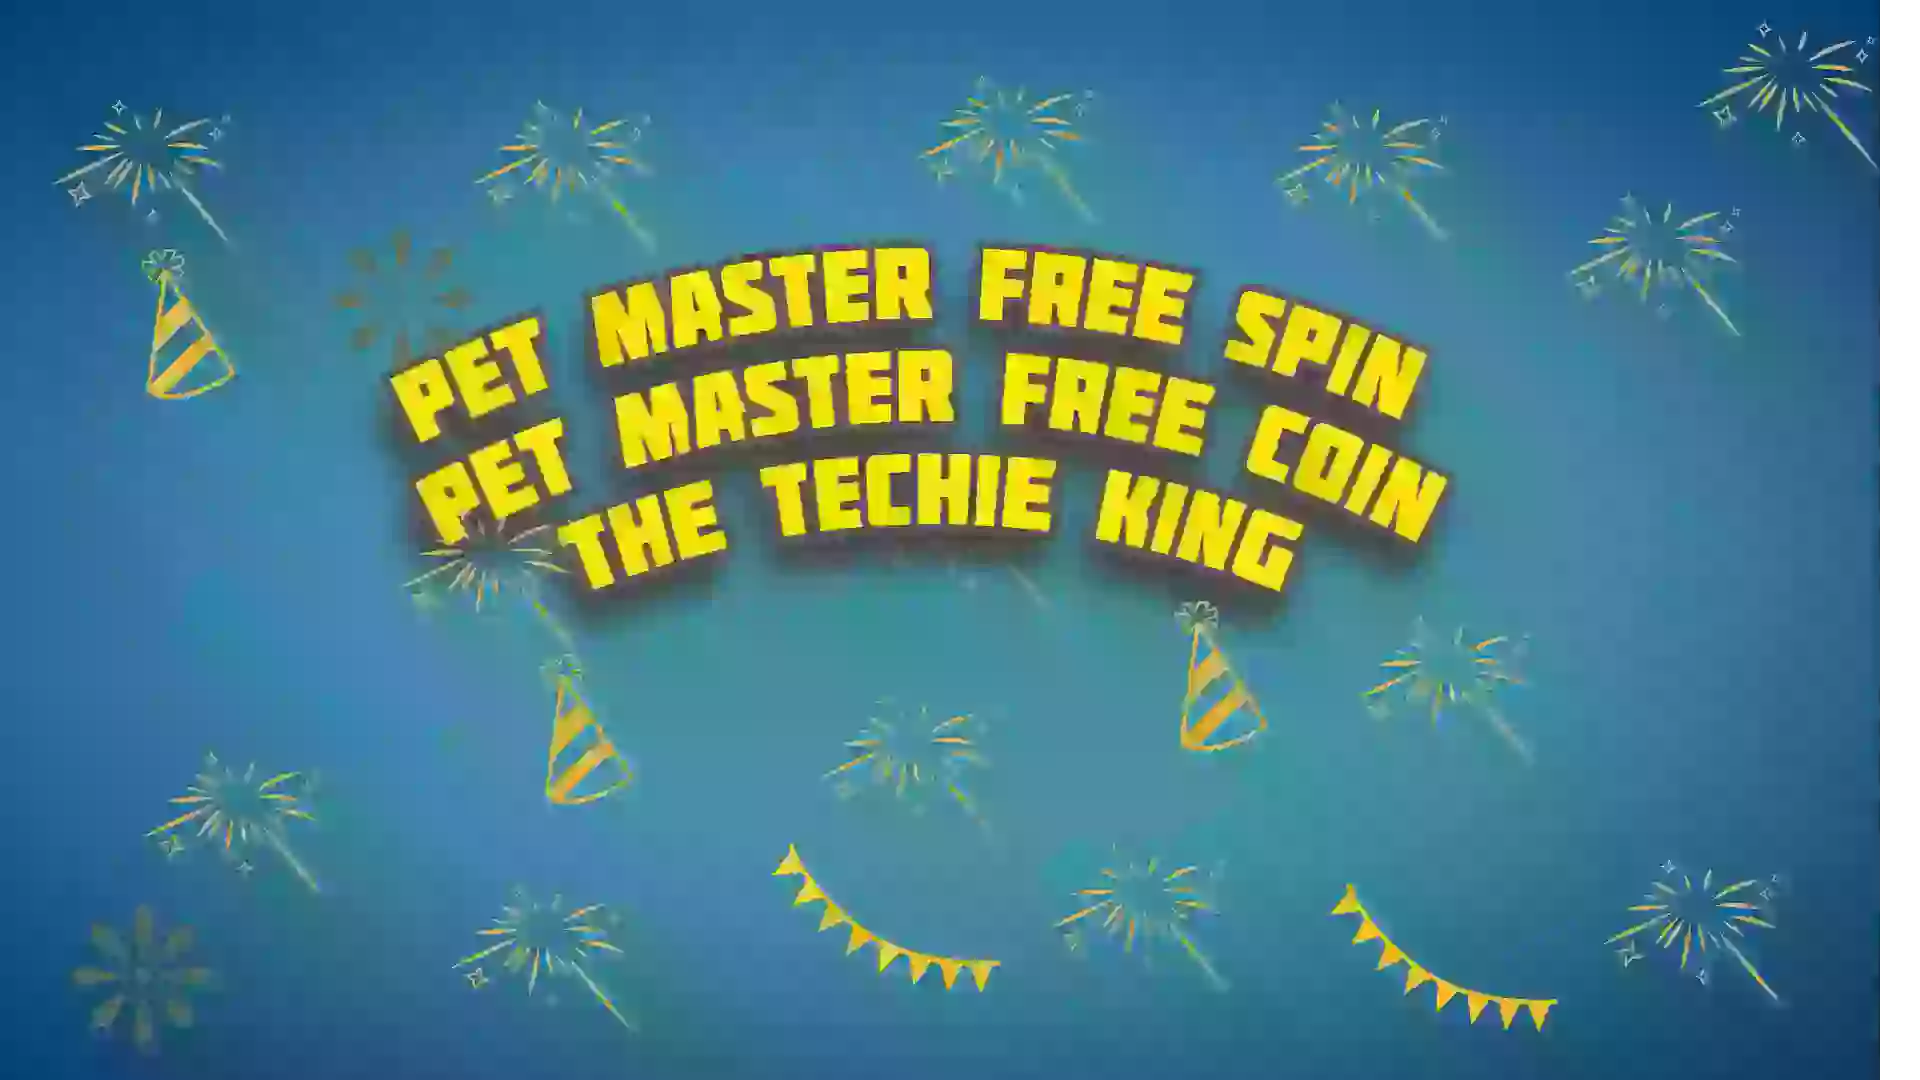 Pet Master free spins daily links